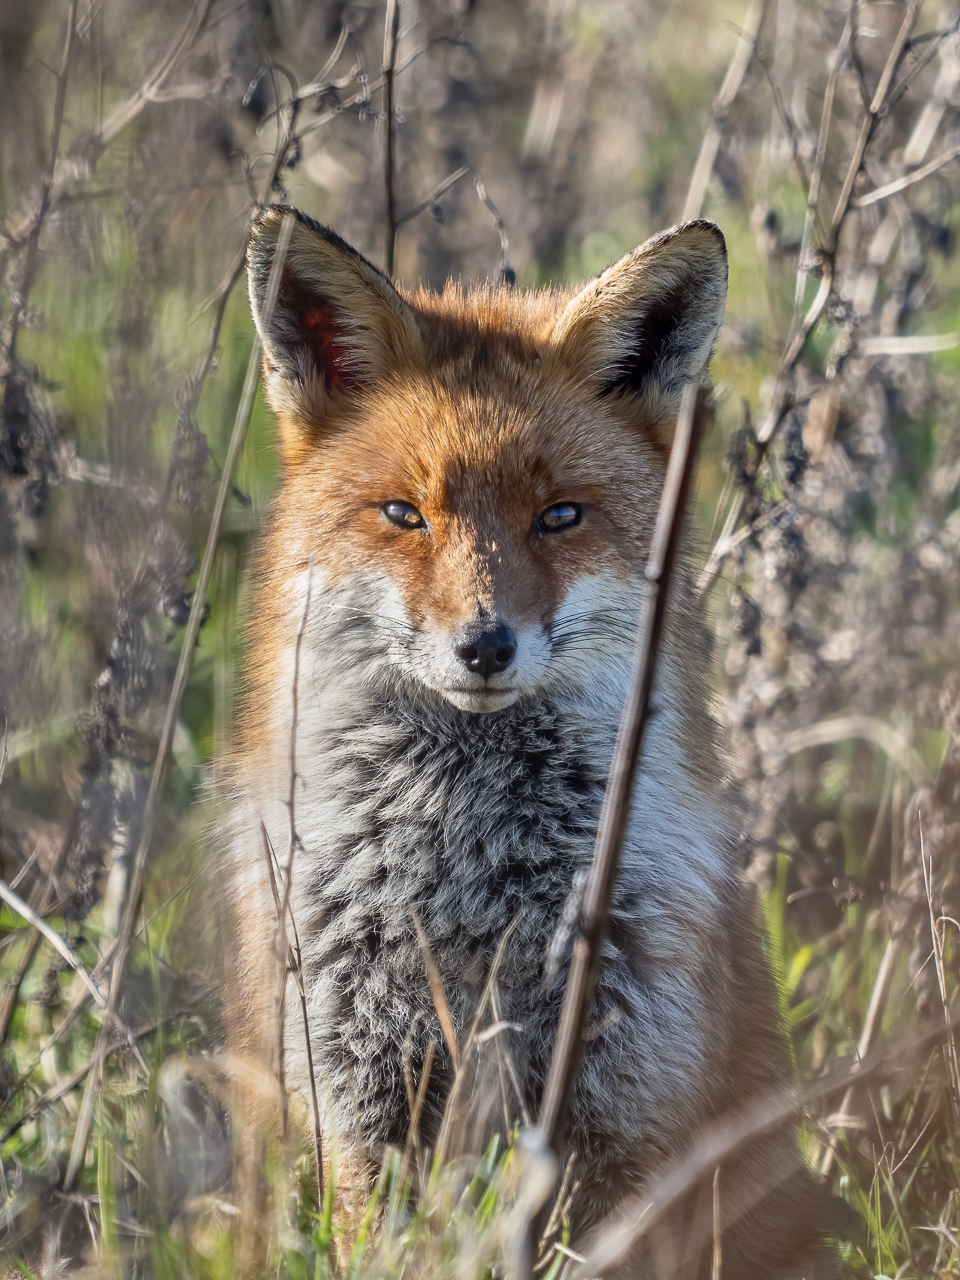 A red fox (Vulpes vulpes) in the Beddington Farmlands nature reserve in Sutton, London.